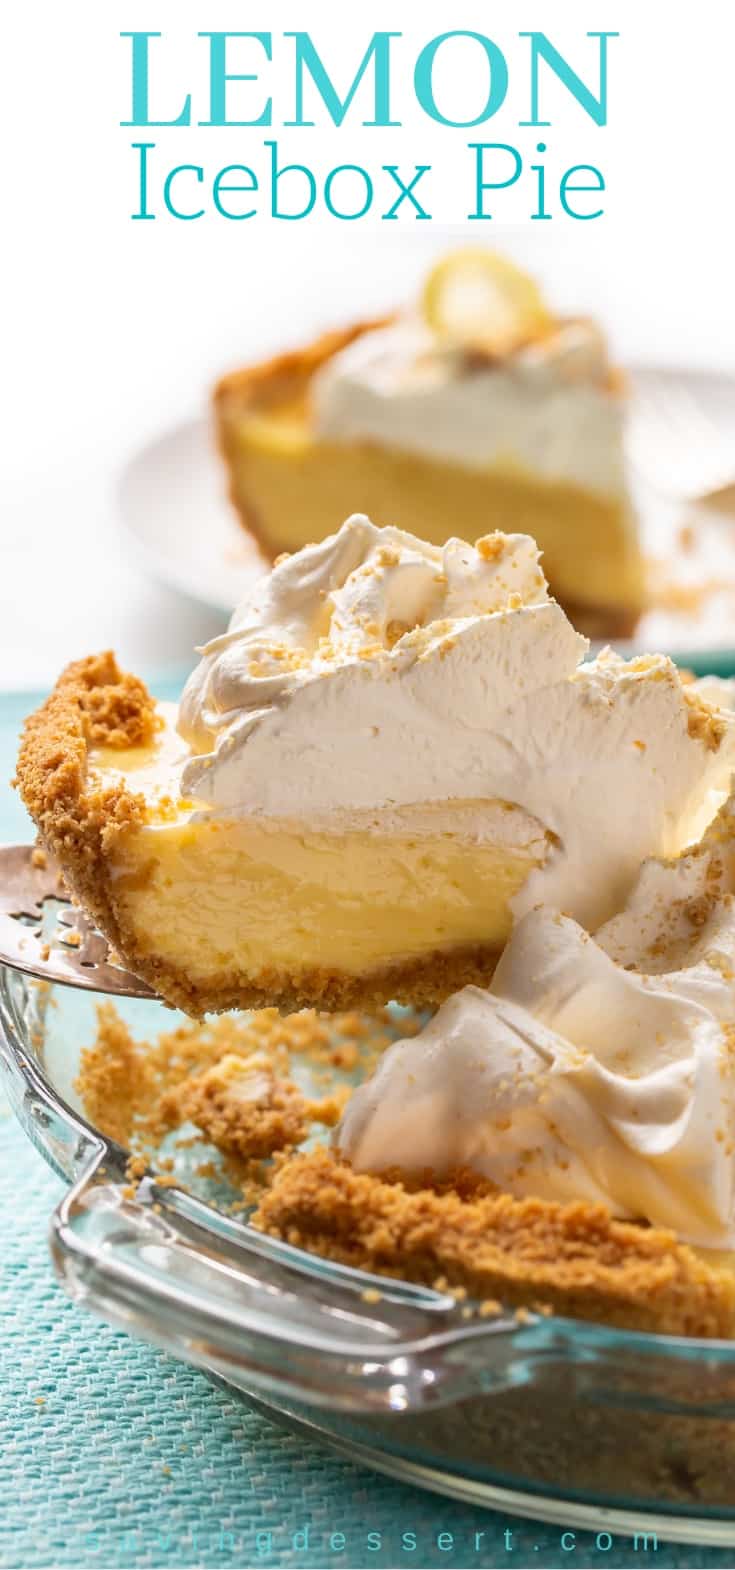 A slice of lemon icebox pie being scooped out of a pie plate